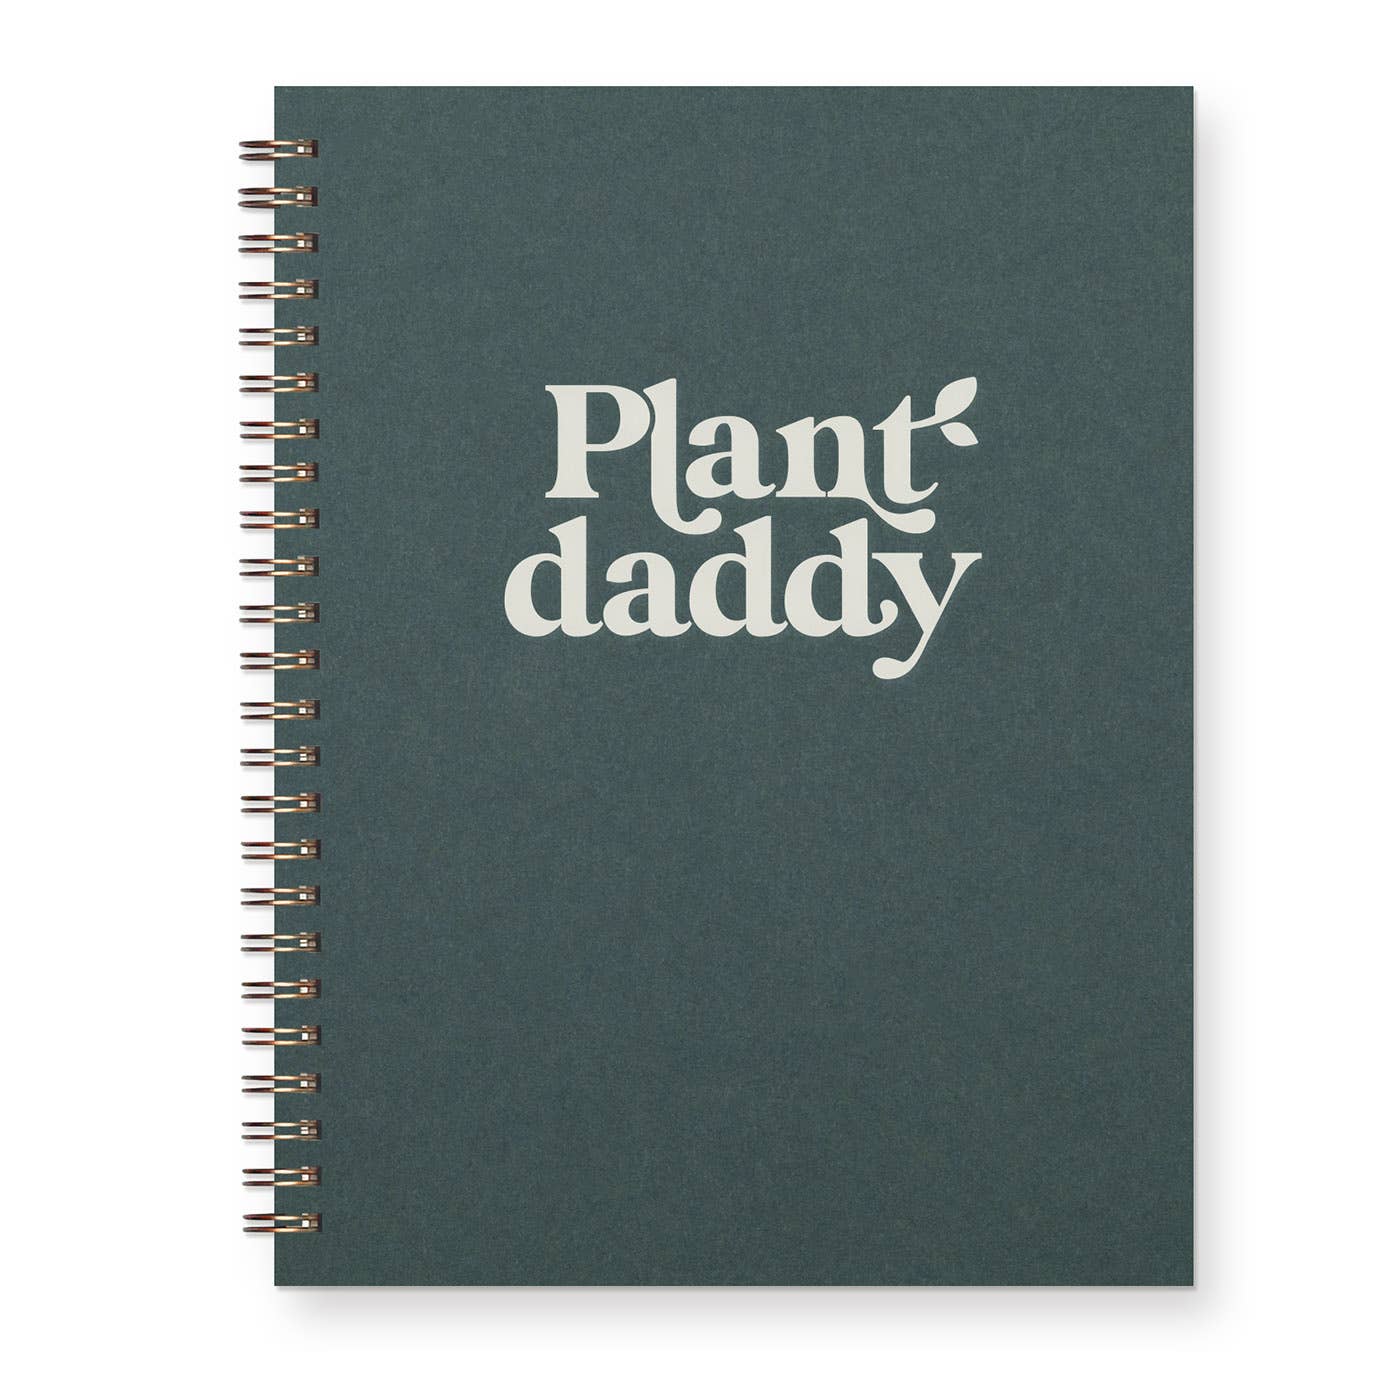 Ruff House Print Shop - Plant Daddy Journal: Lined Notebook: Forest Green Cover | White Ink